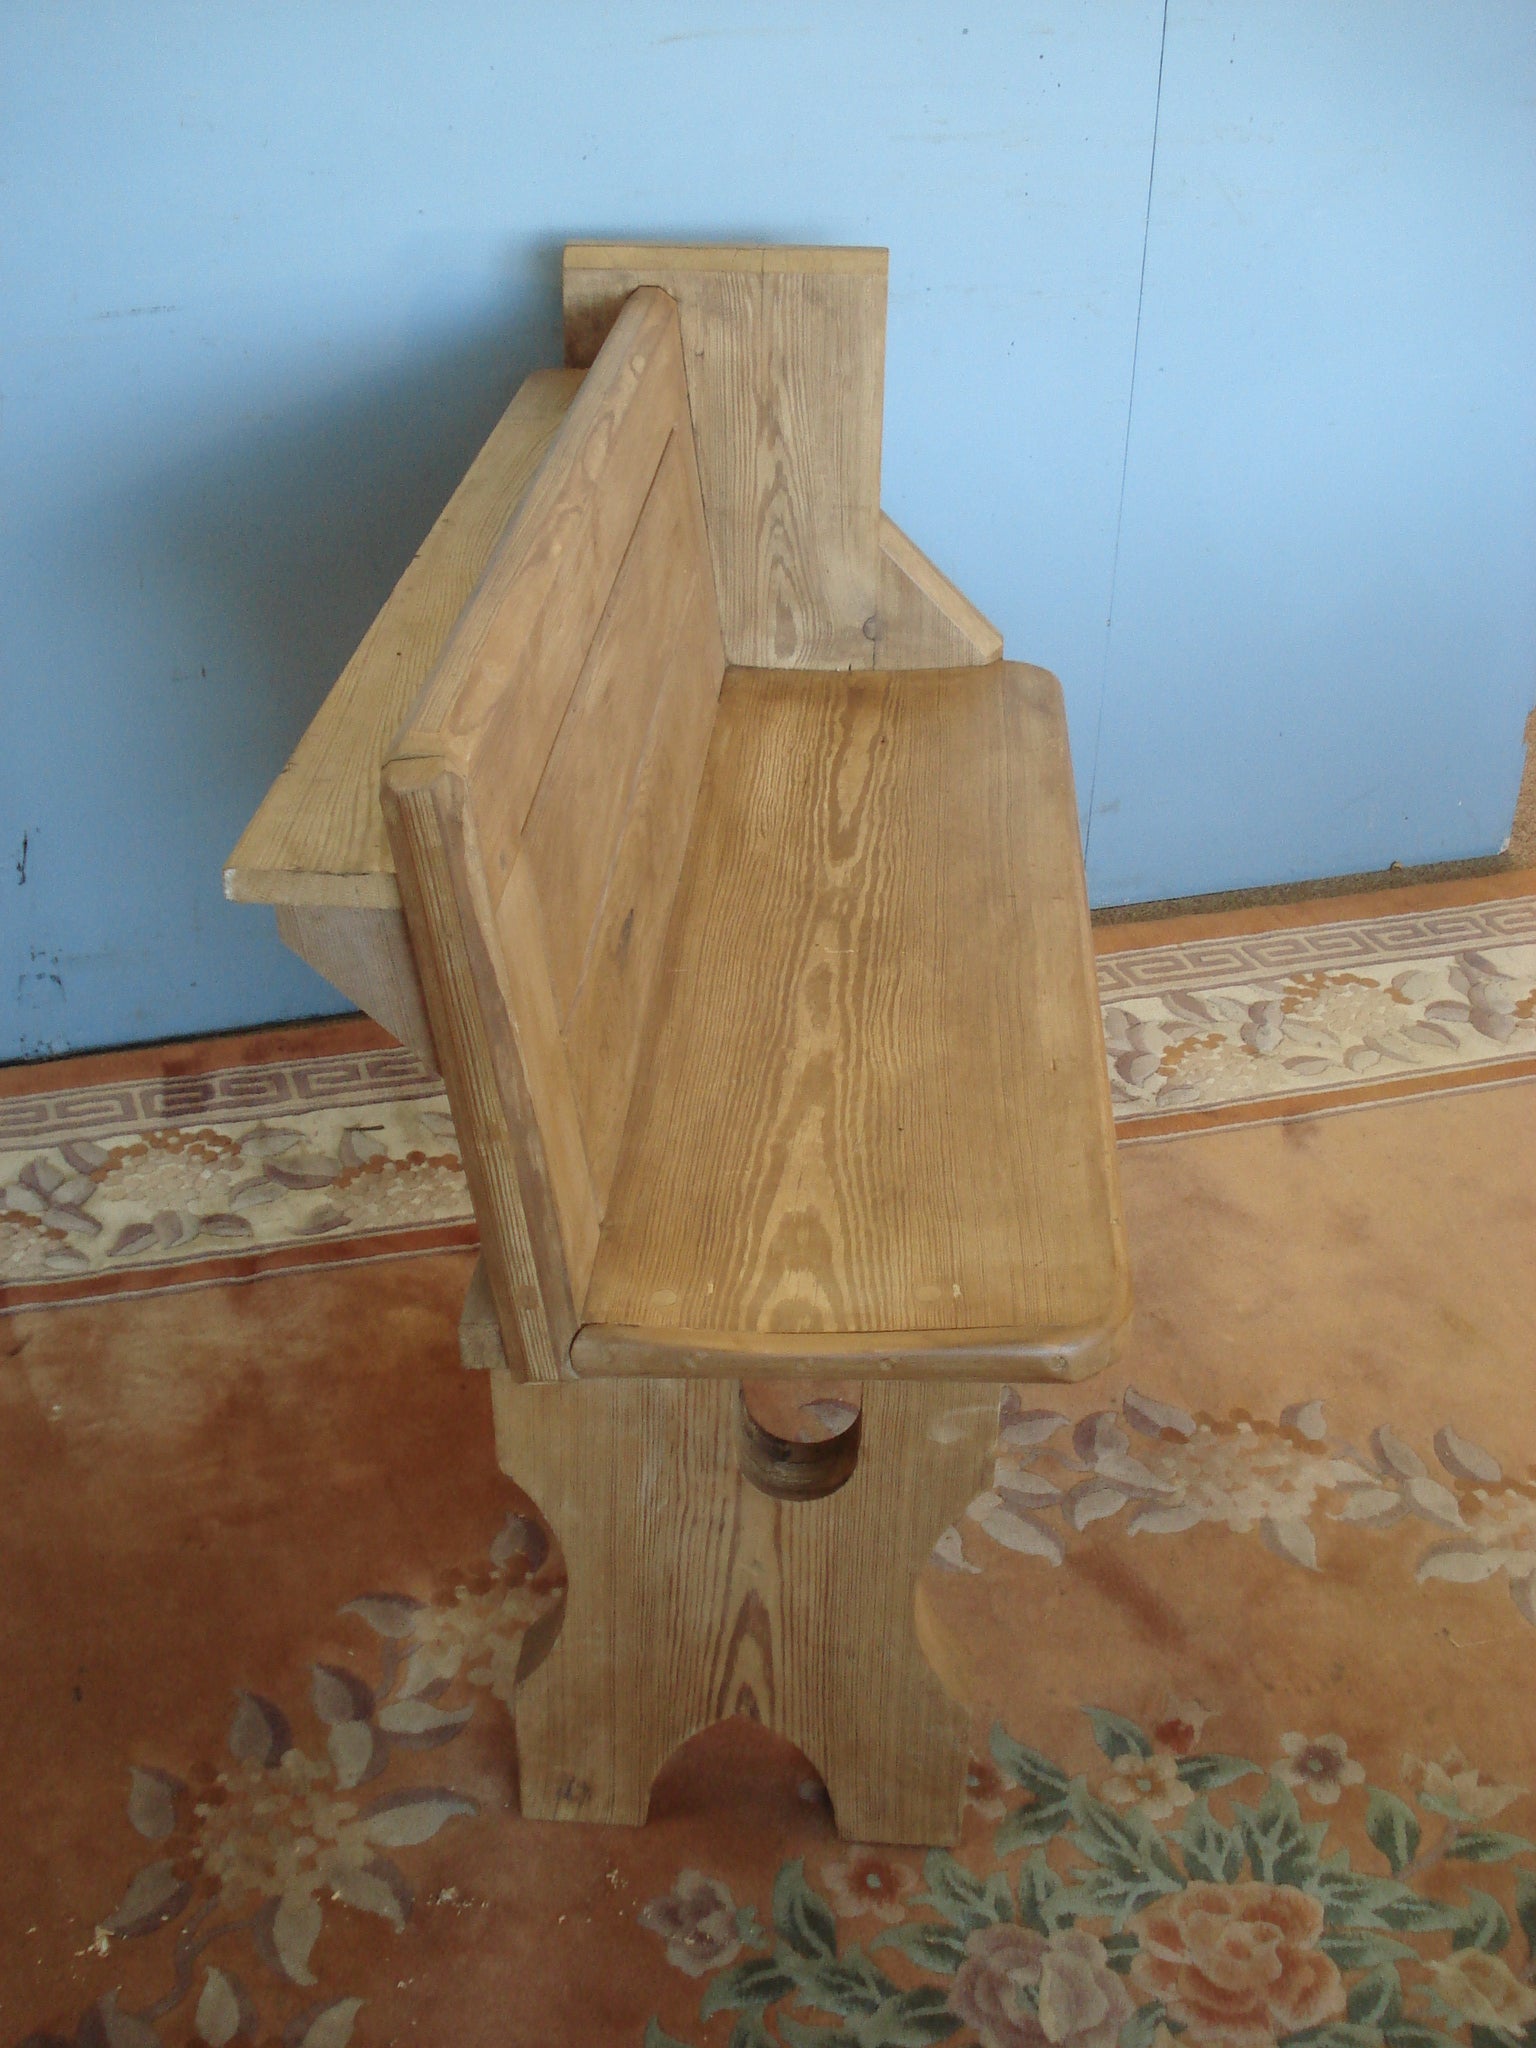 Pew/ Hall seat with open end